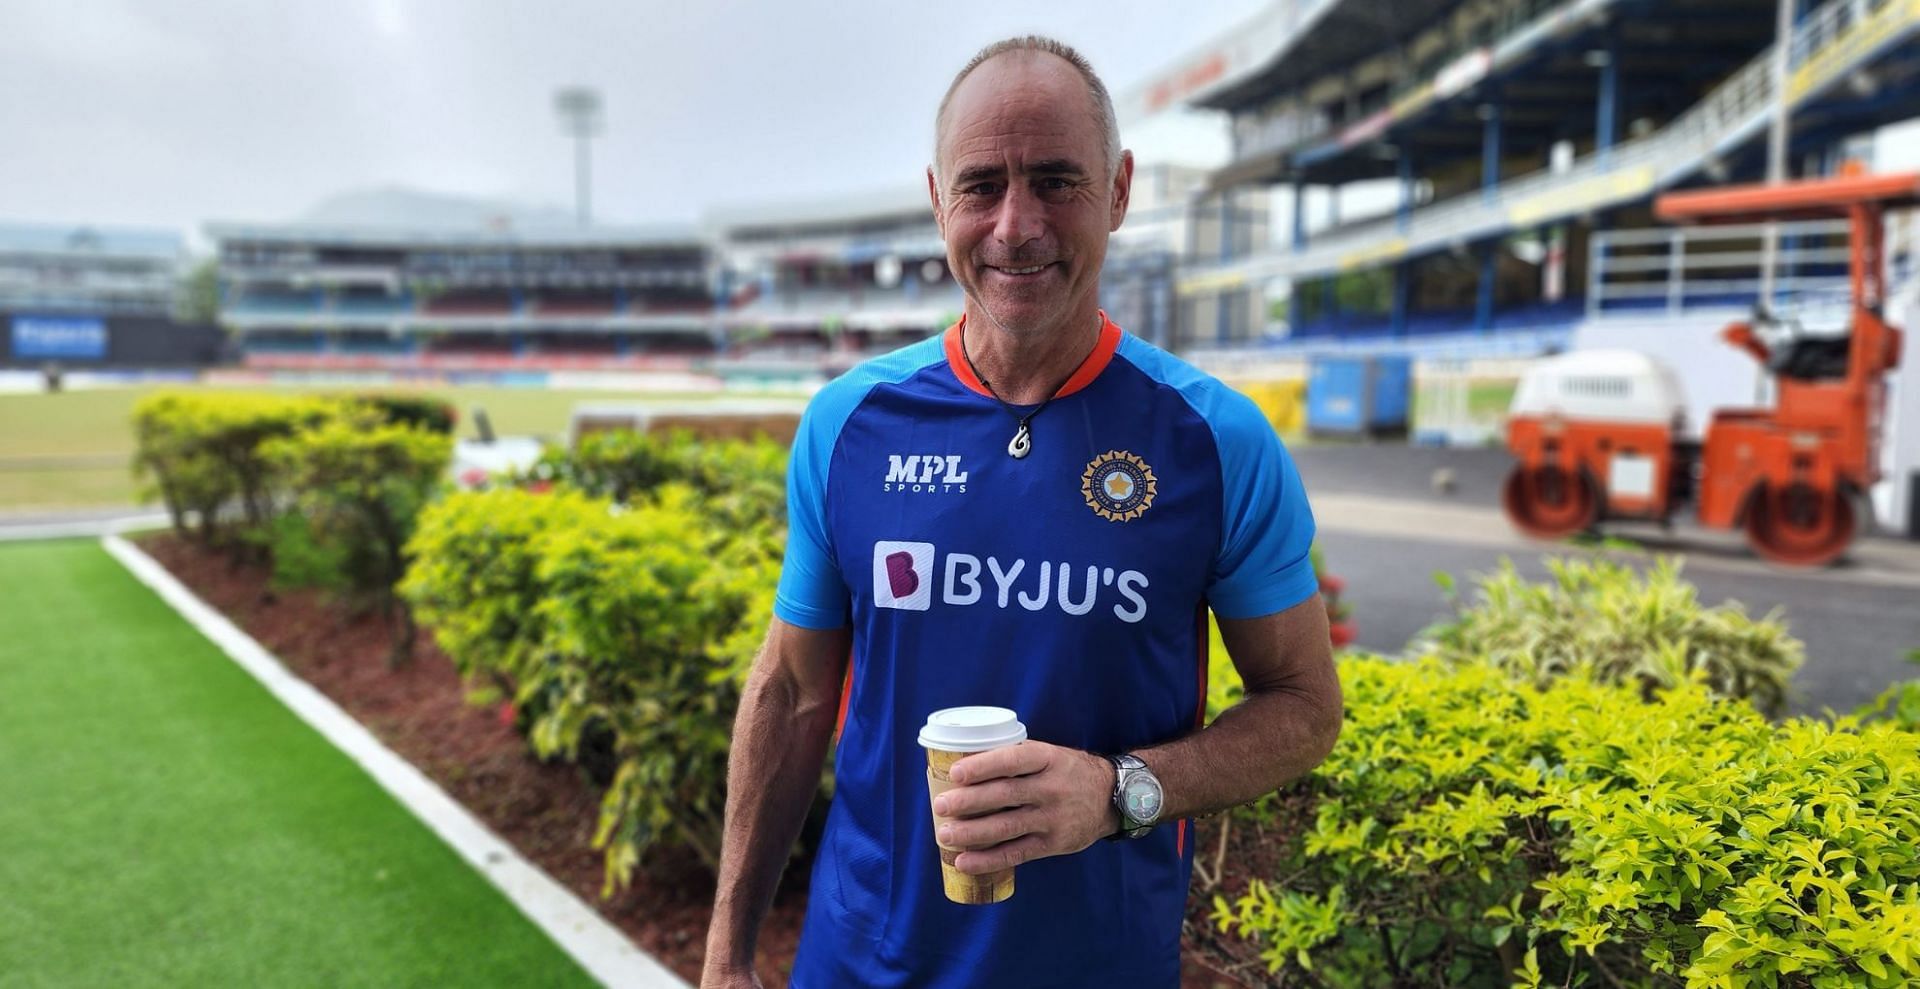 Paddy Upton joined the Indian team on Tuesday in West Indies (Credit: Twitter/BCCI)